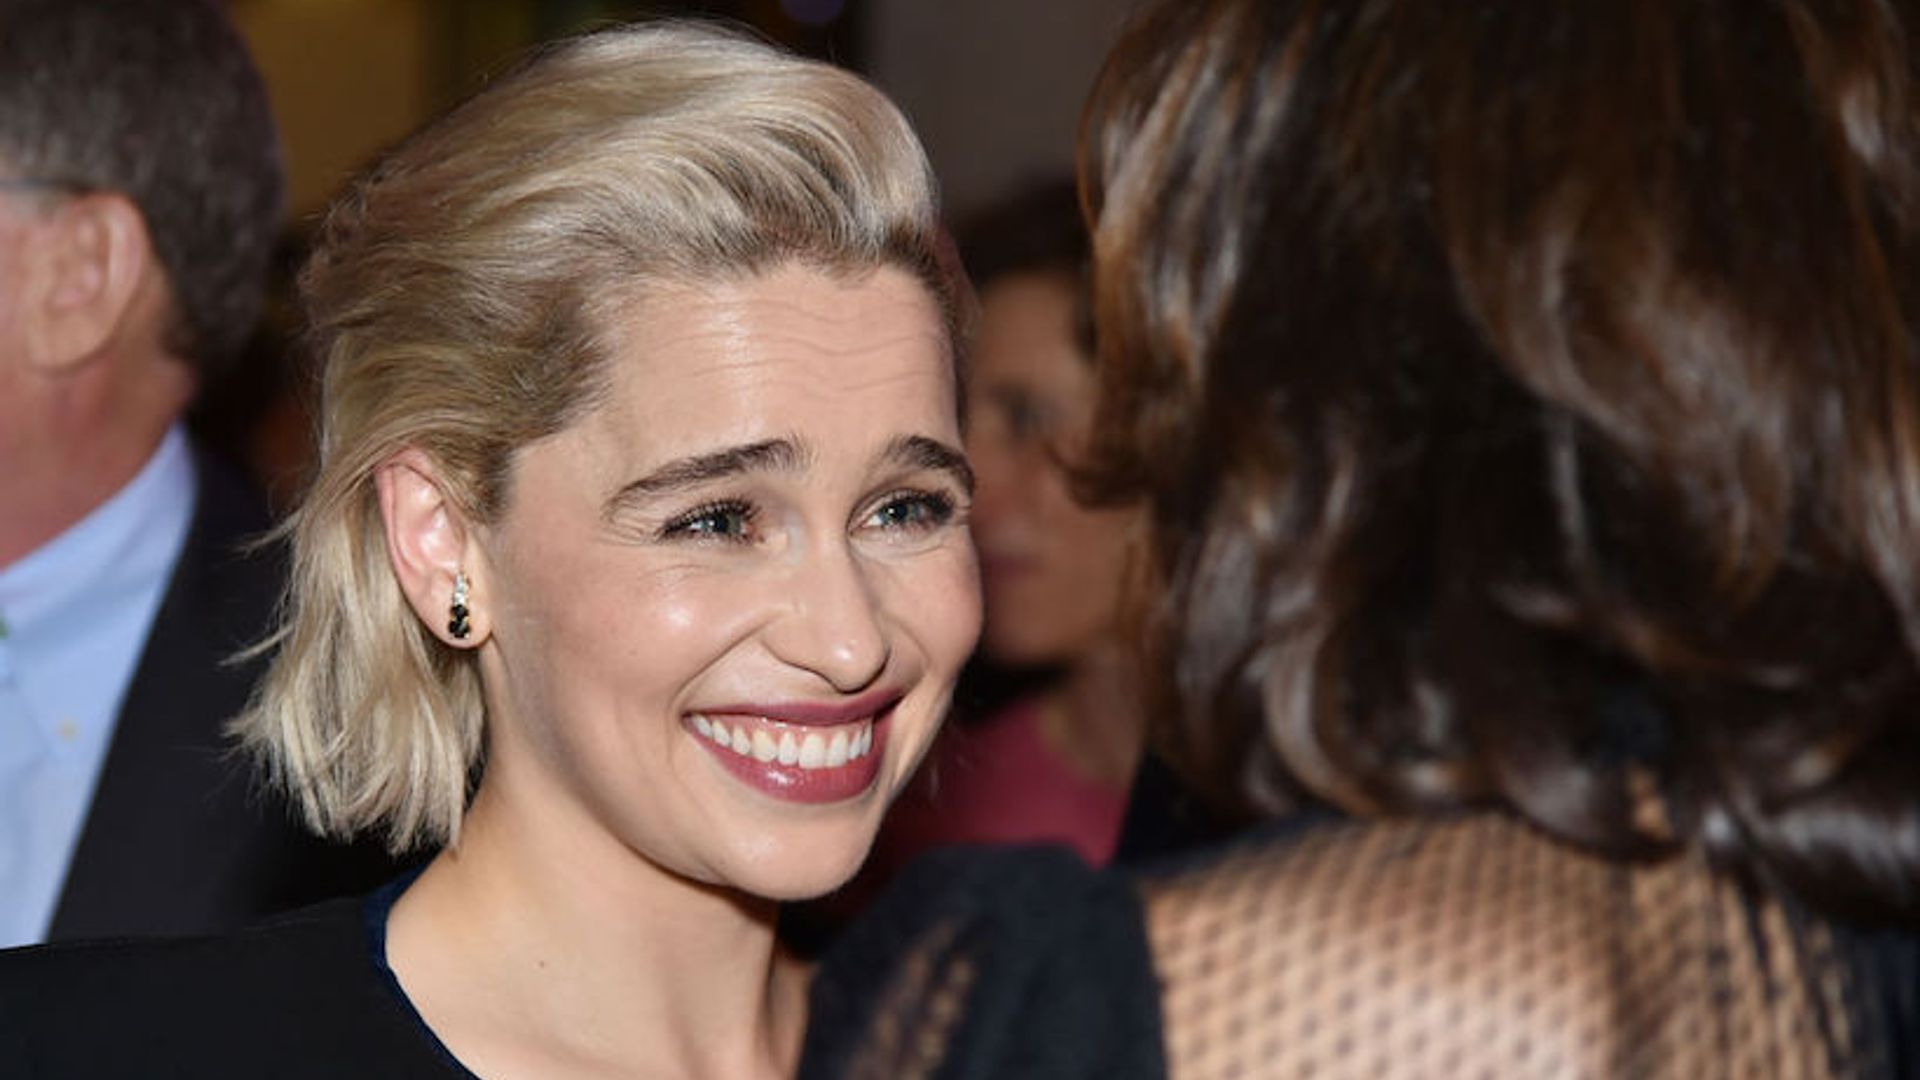 Emilia Clarke admits to embarrassing moment with Prince William